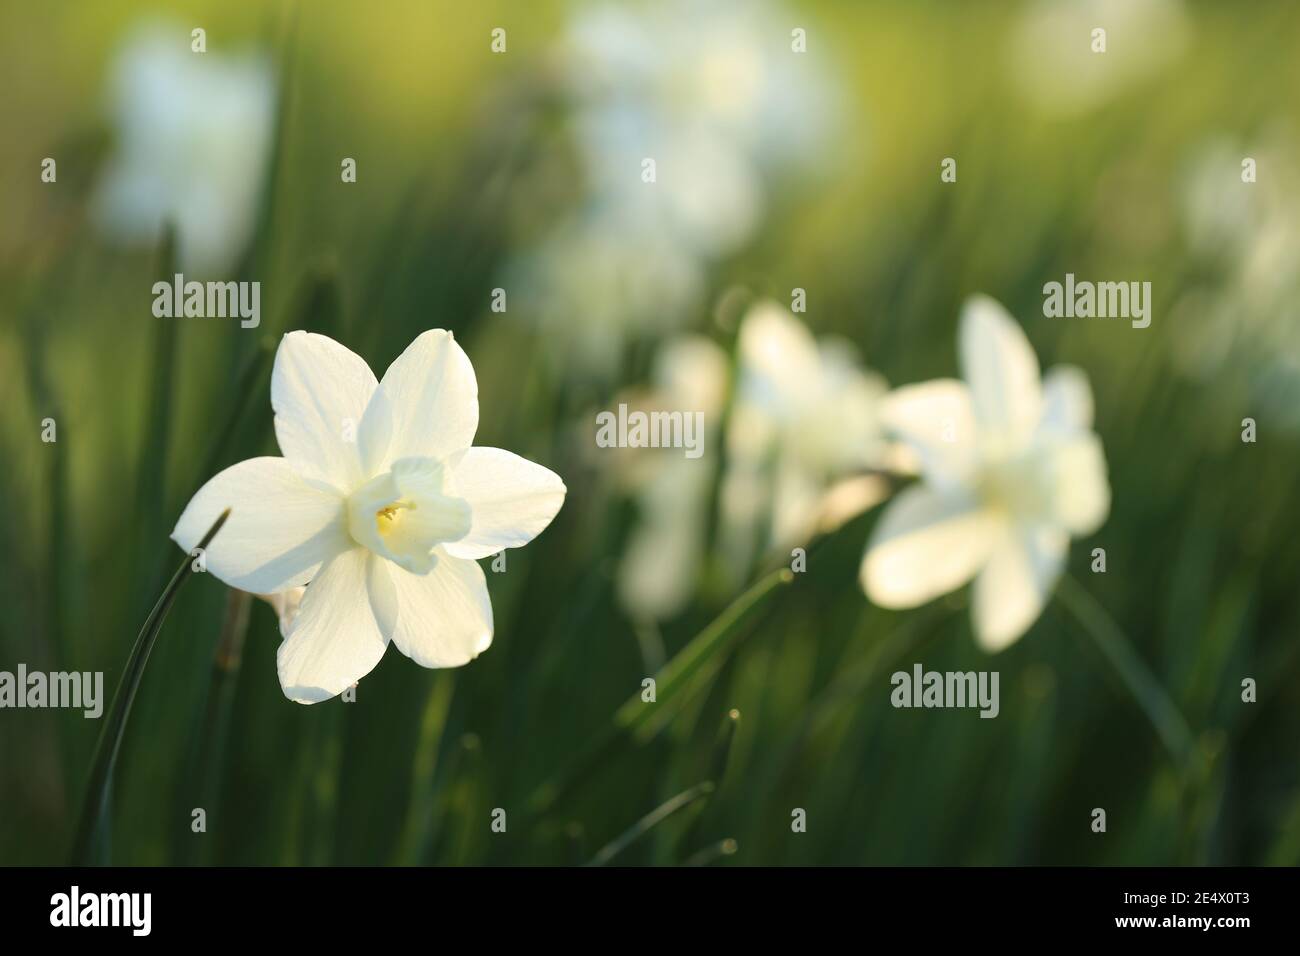 White daffodils flowers in the sunbeams on a blurred garden background. Spring flowers.Floriculture and horticulture concept. Growing daffodils Stock Photo